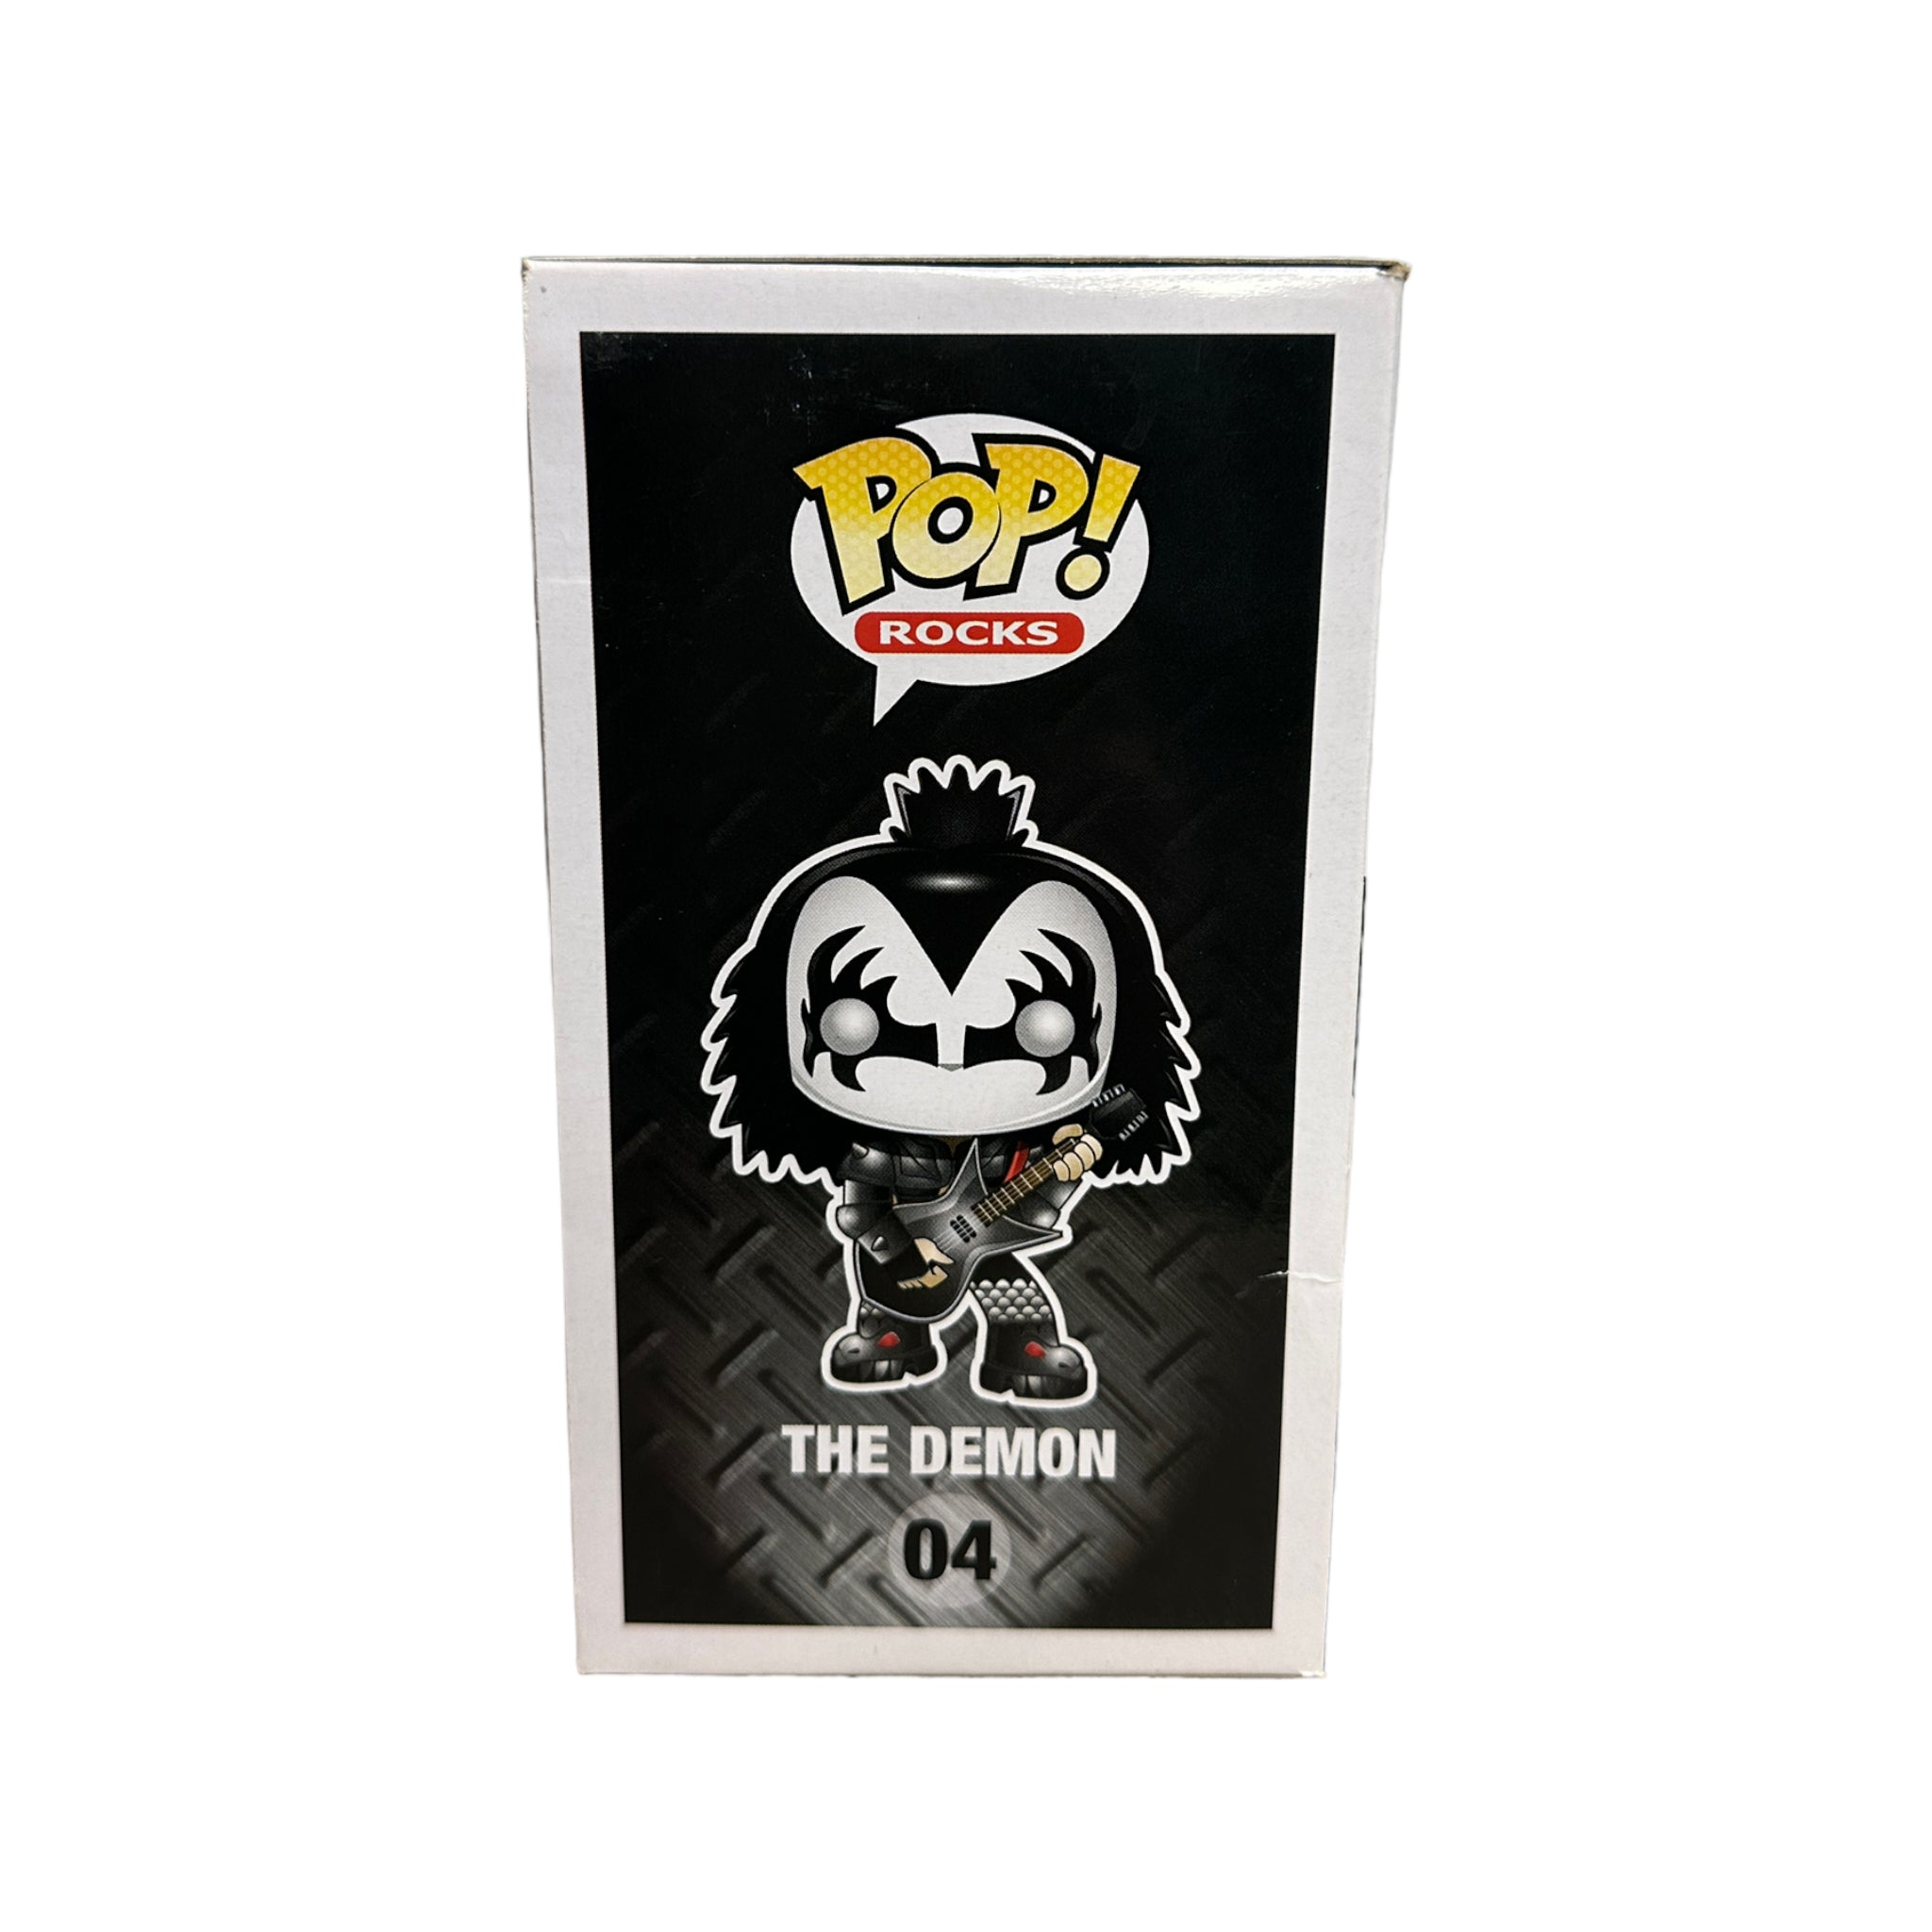 The Demon #04 (Glow Chase) Funko Pop! - Kiss - 2012 Pop! - Condition 7/10